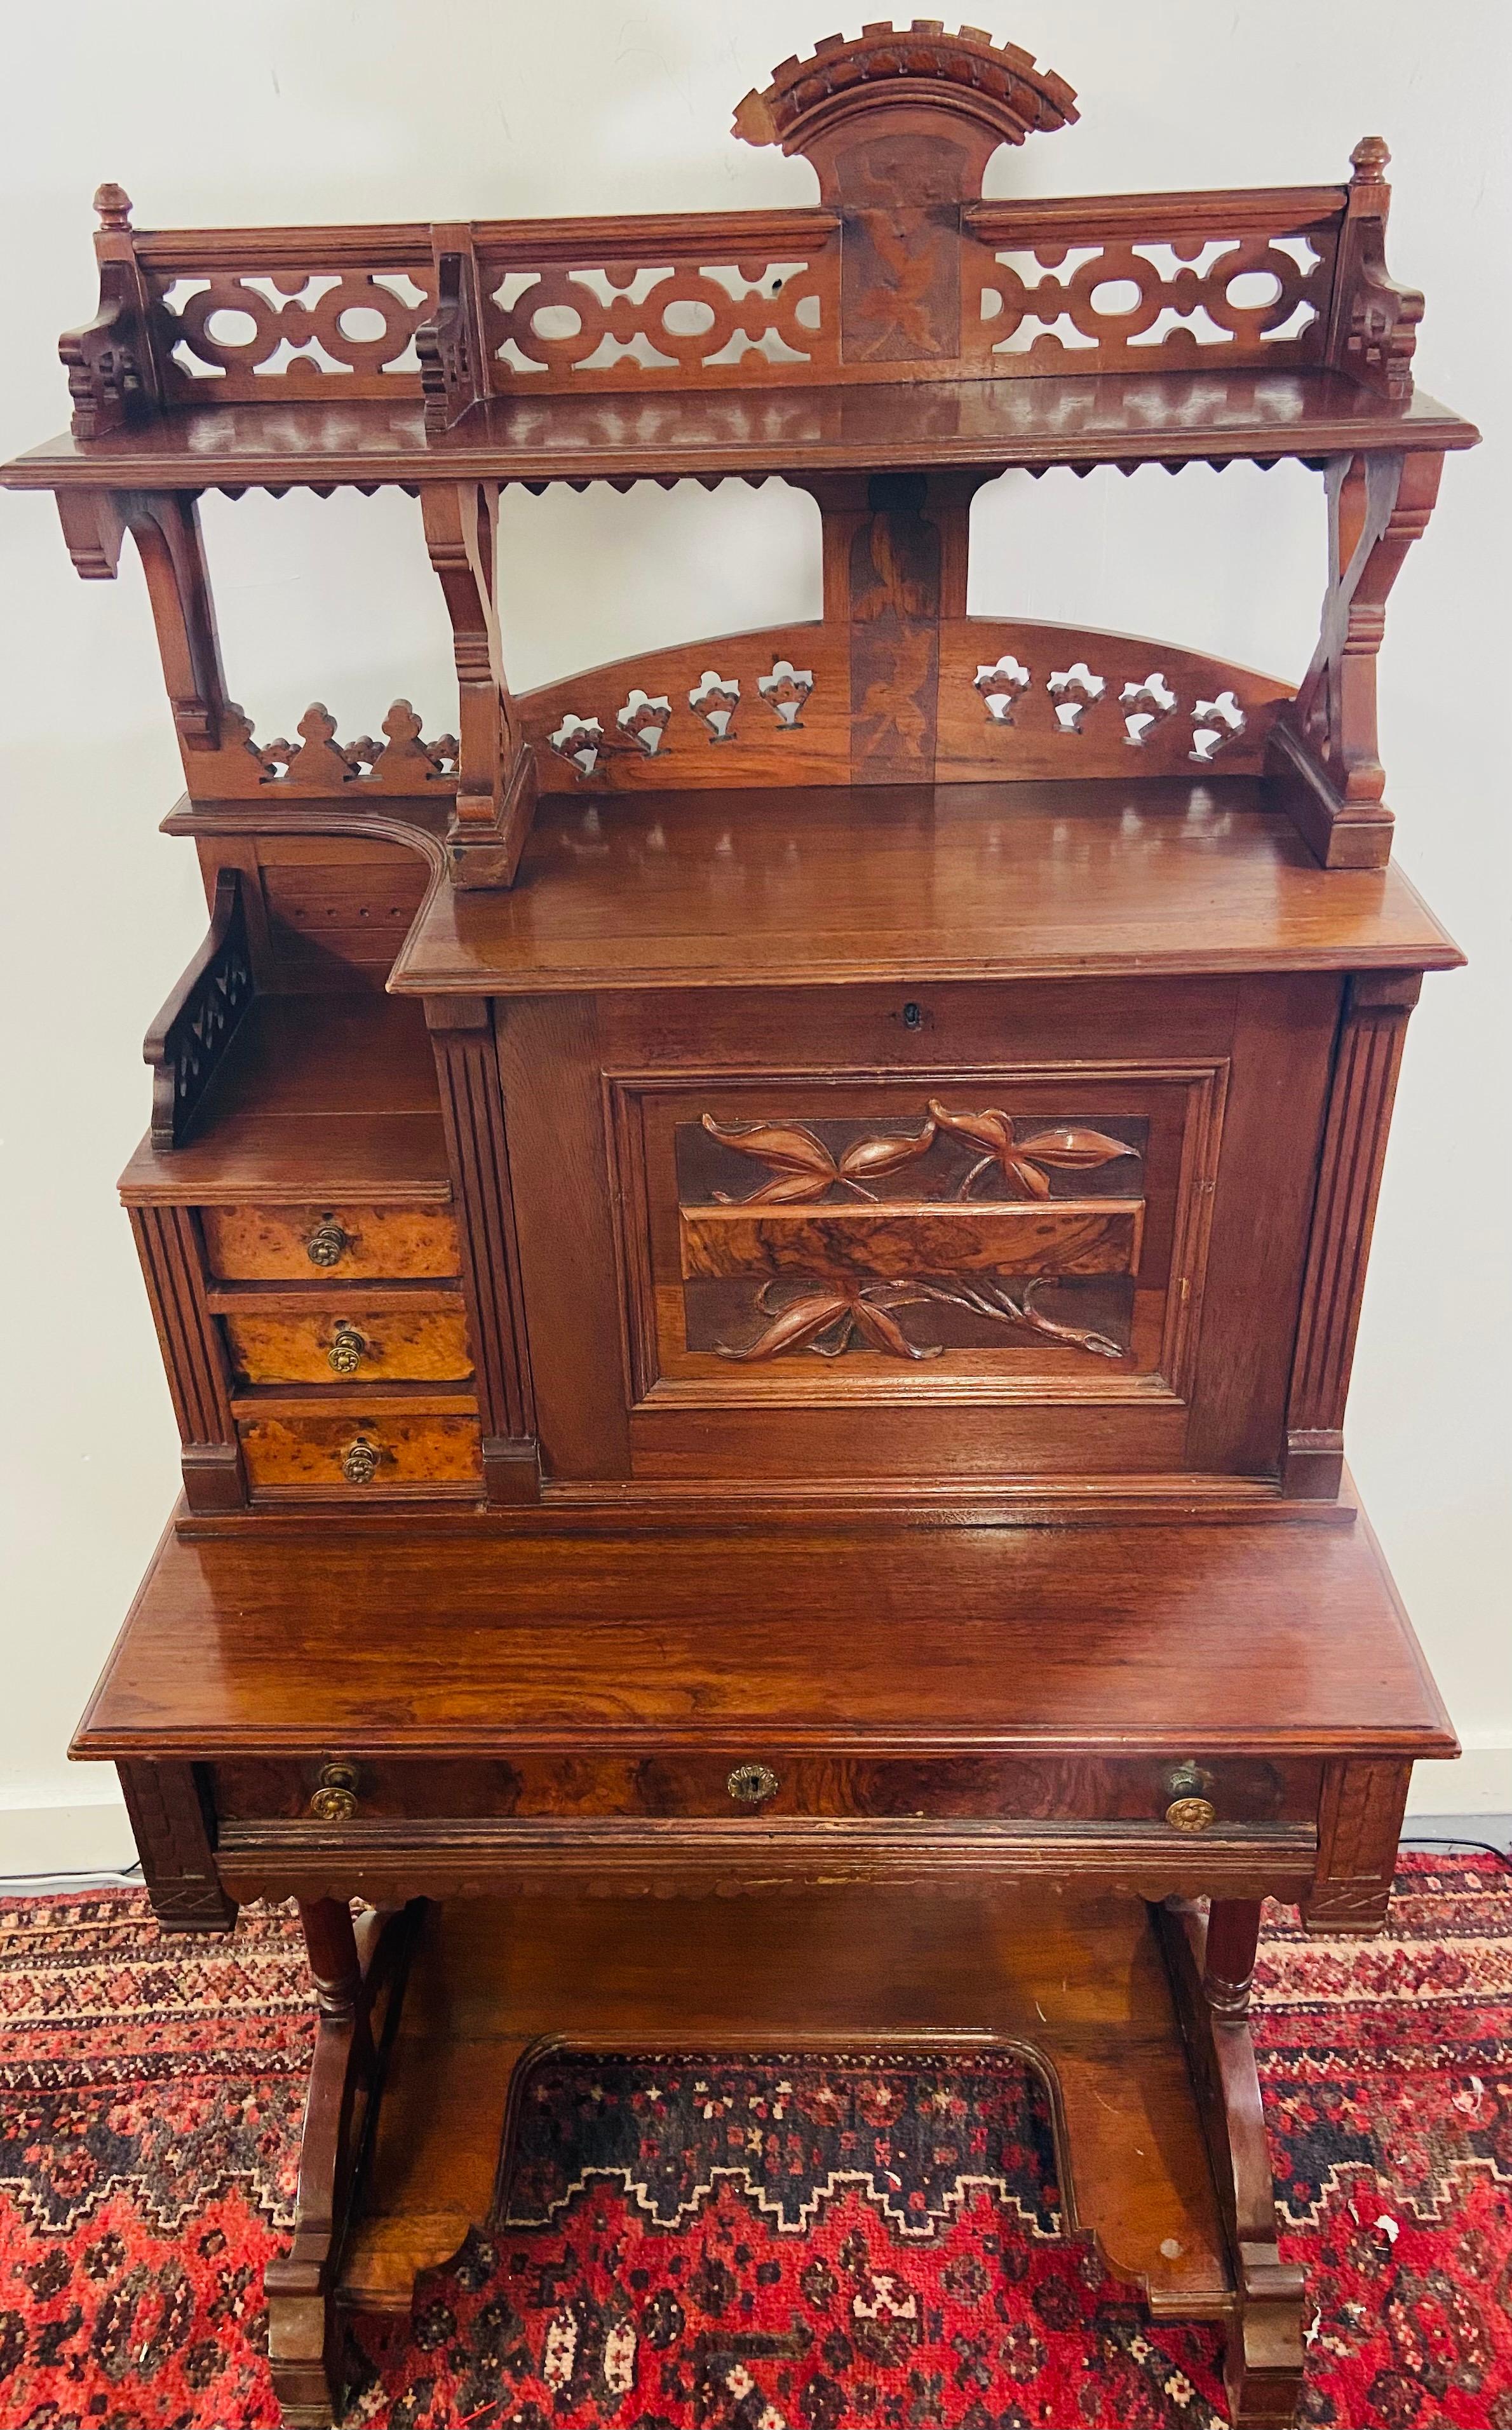 A gorgeous late 19th century English mahogany antique secretary desk. The desk features amazing carving design in both sides and front, a carved pediment top and bottom, three small side drawers and two shelves and one single drawer. The square